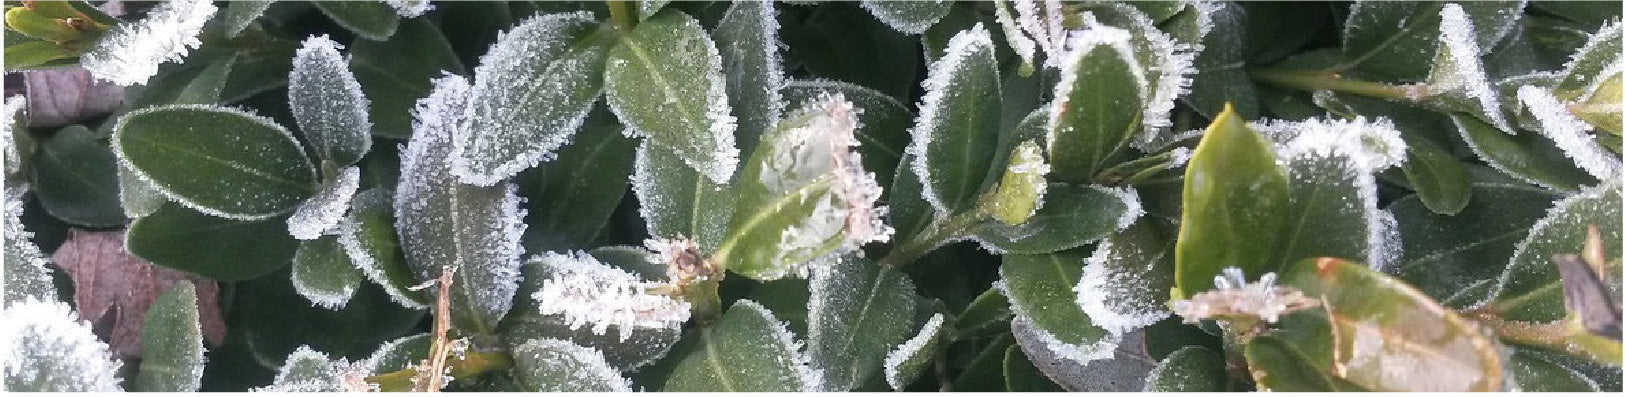 Frost Covered Plants